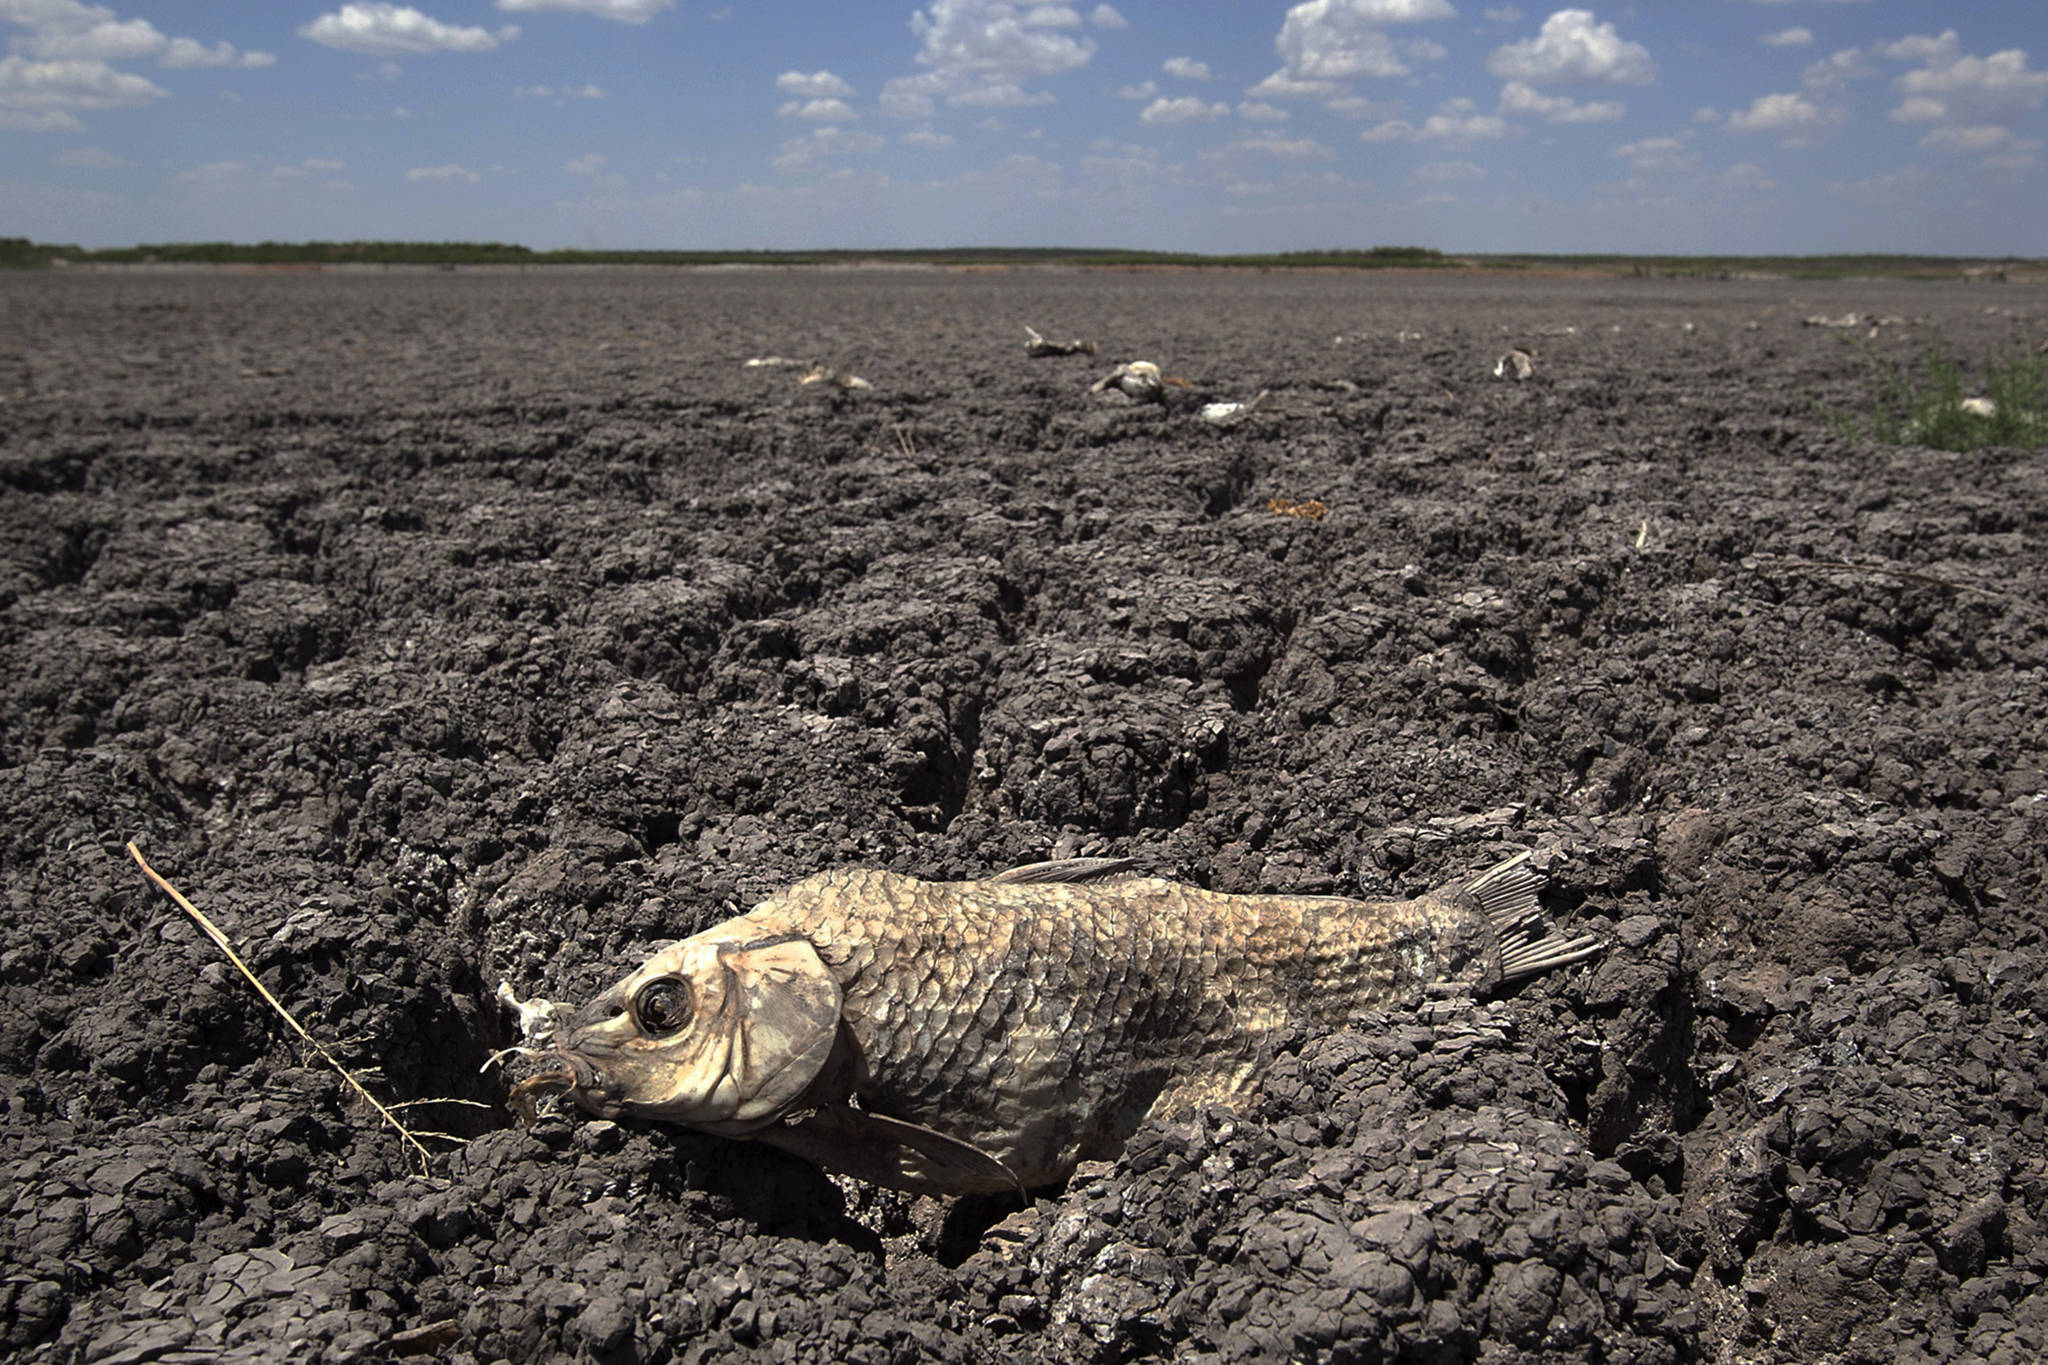 FILE - In this Wednesday, Aug. 3, 2011 file photo, the remains of a carp are seen on the dry lake bed of O.C. Fisher Lake in San Angelo, Texas. According to data released by the National Oceanic and Atmospheric Administration on Tuesday, May 4, 2021, the new United States normal is not just hotter, but wetter in the eastern and central parts of the nation and considerably drier in the West than just a decade earlier. (AP Photo / Tony Gutierrez)